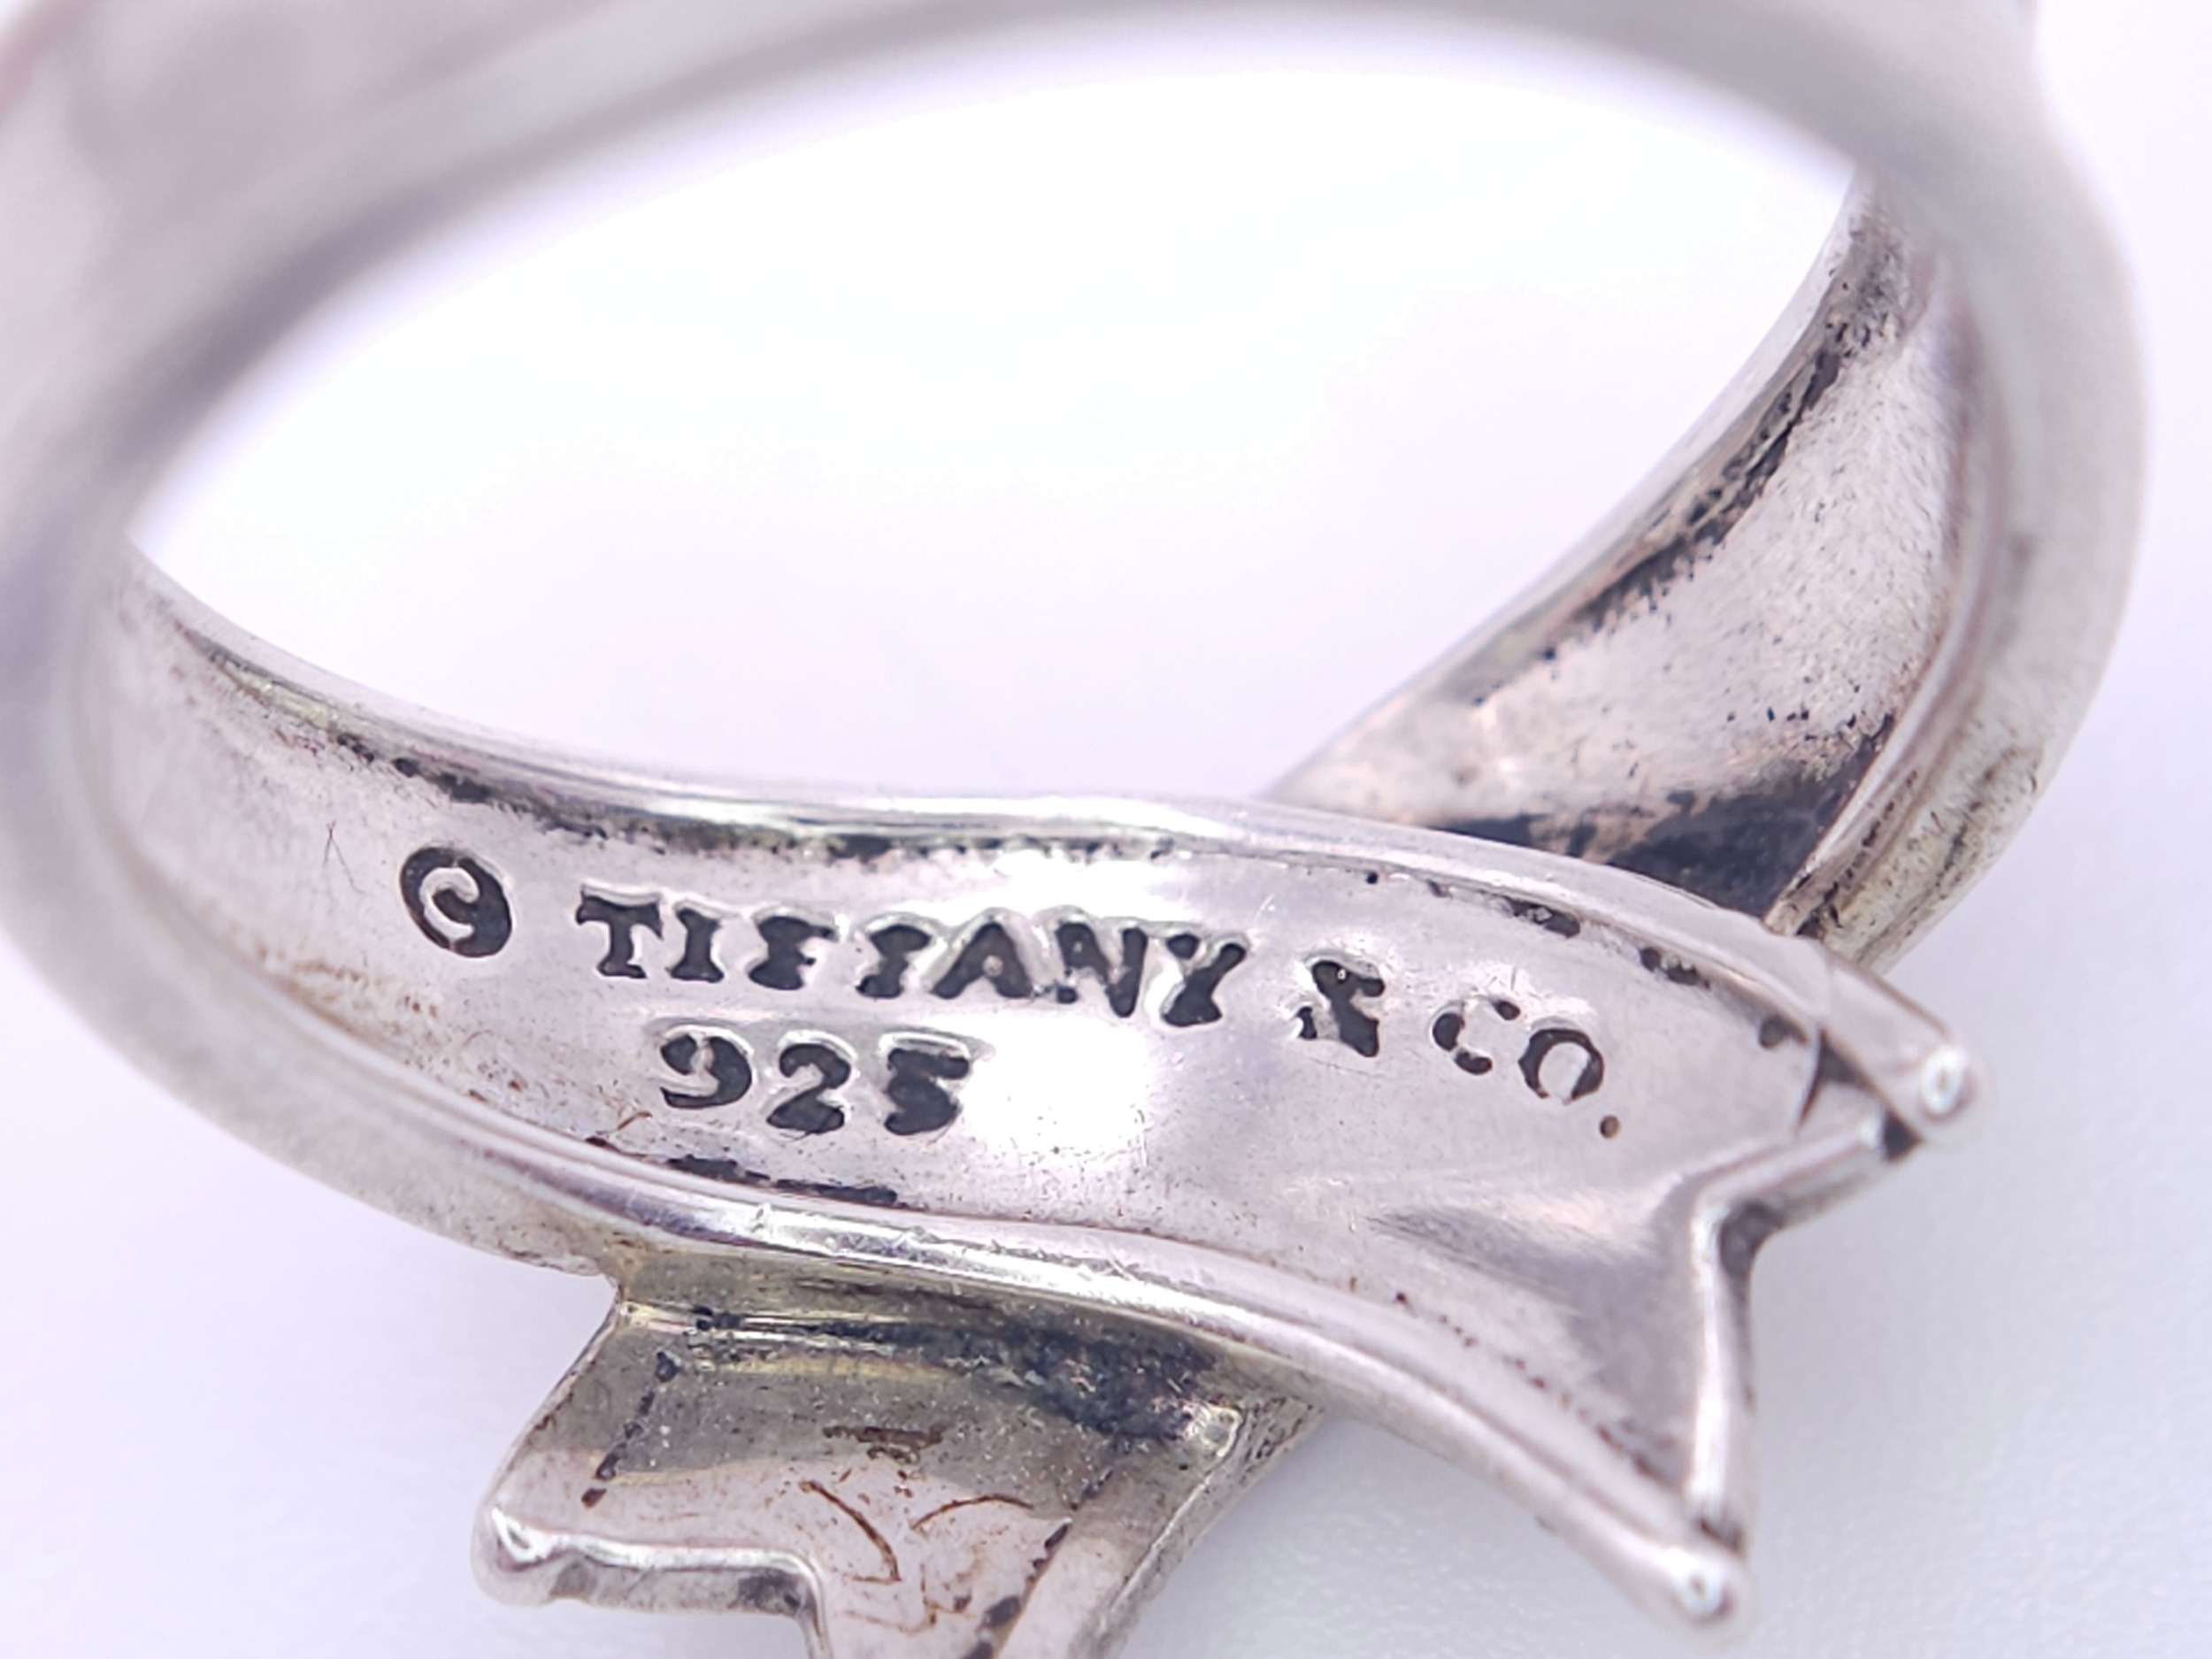 A TIFFANY & CO STERLING SILVER RIBBON RING. Size J, 3.4g weight. Ref: SC 8097 - Image 5 of 6